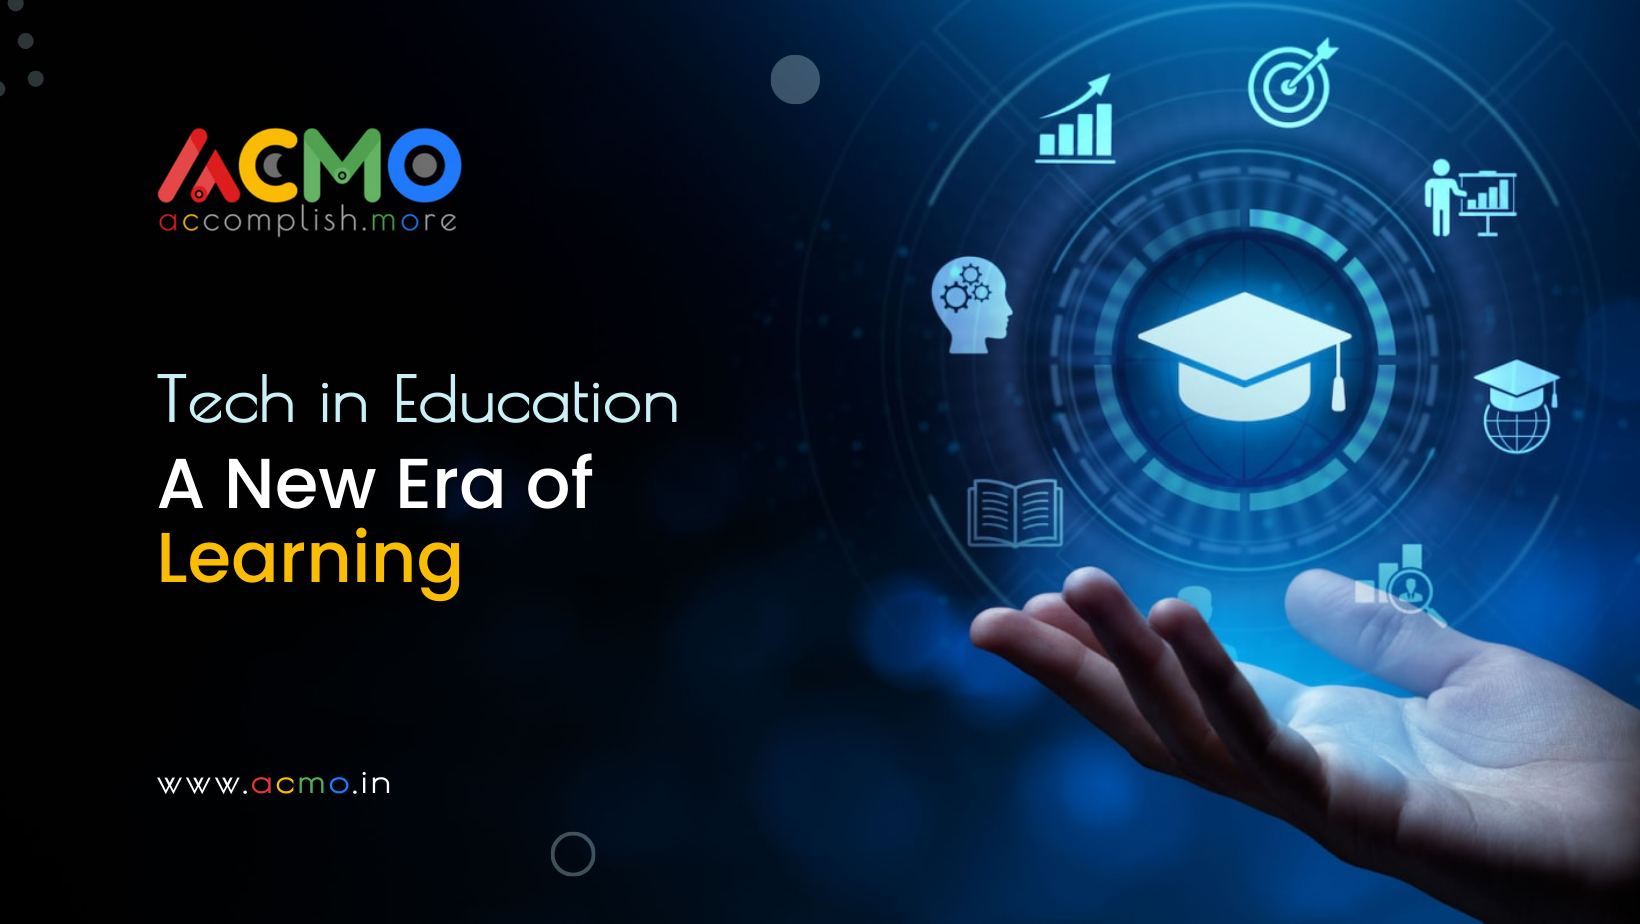 Streamline dynamic aspects of the Education System through Tech